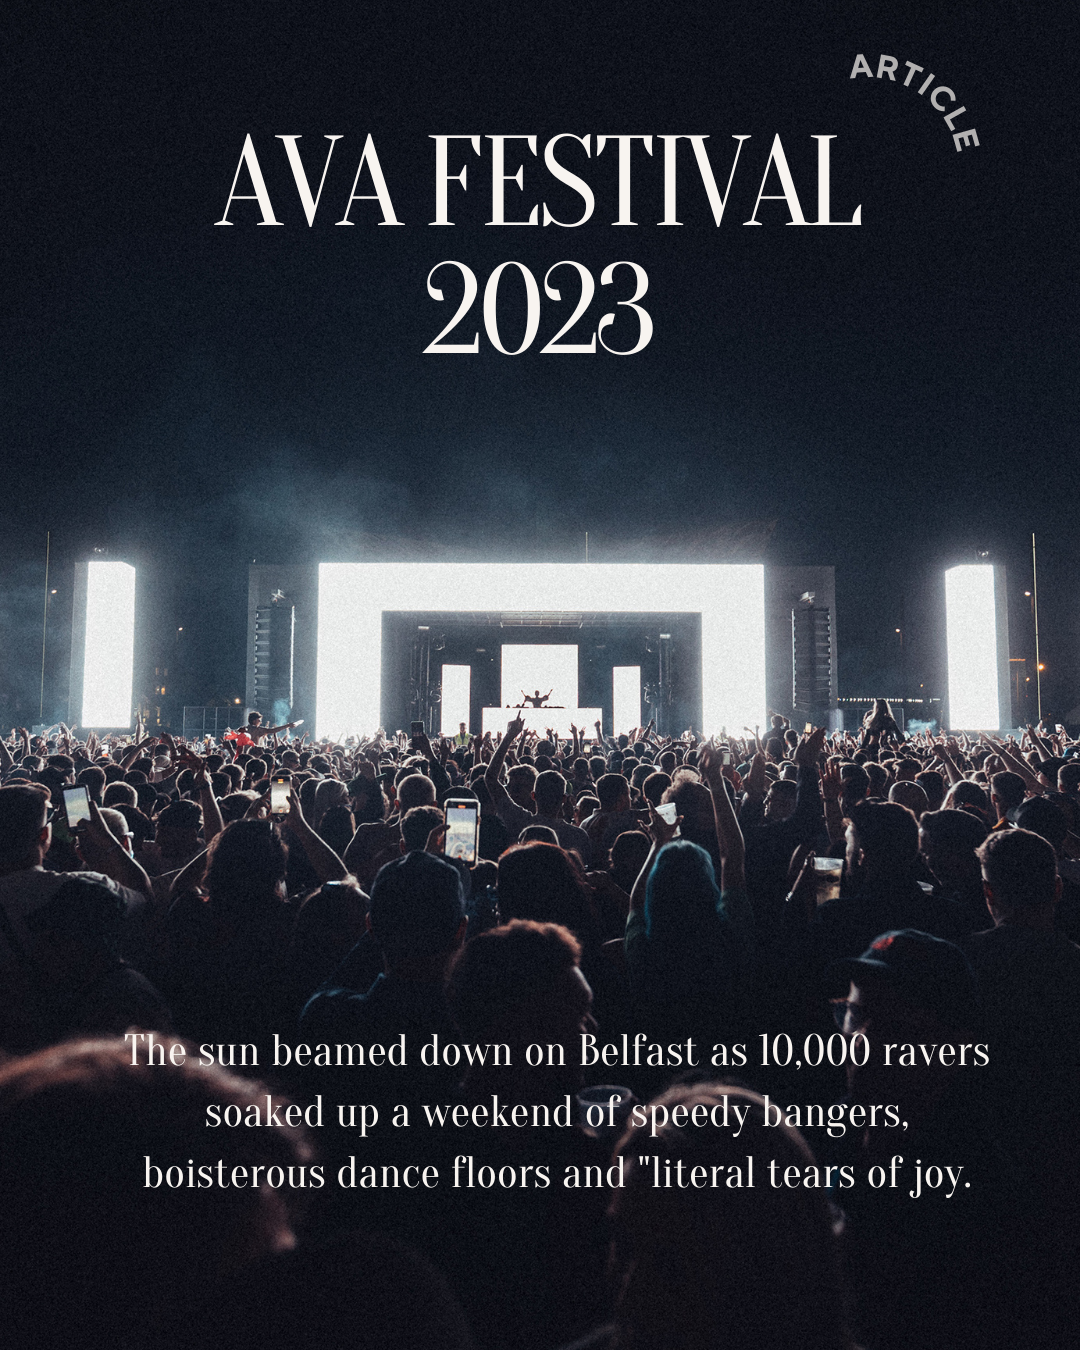 oid 78

AVA FESTIVAL
2023

 

“The.sun beamed down on Belfast as 10, 000 ENO
re up a weekend of speedy bangers,

boisterous dance floors and "literal tears of joy.